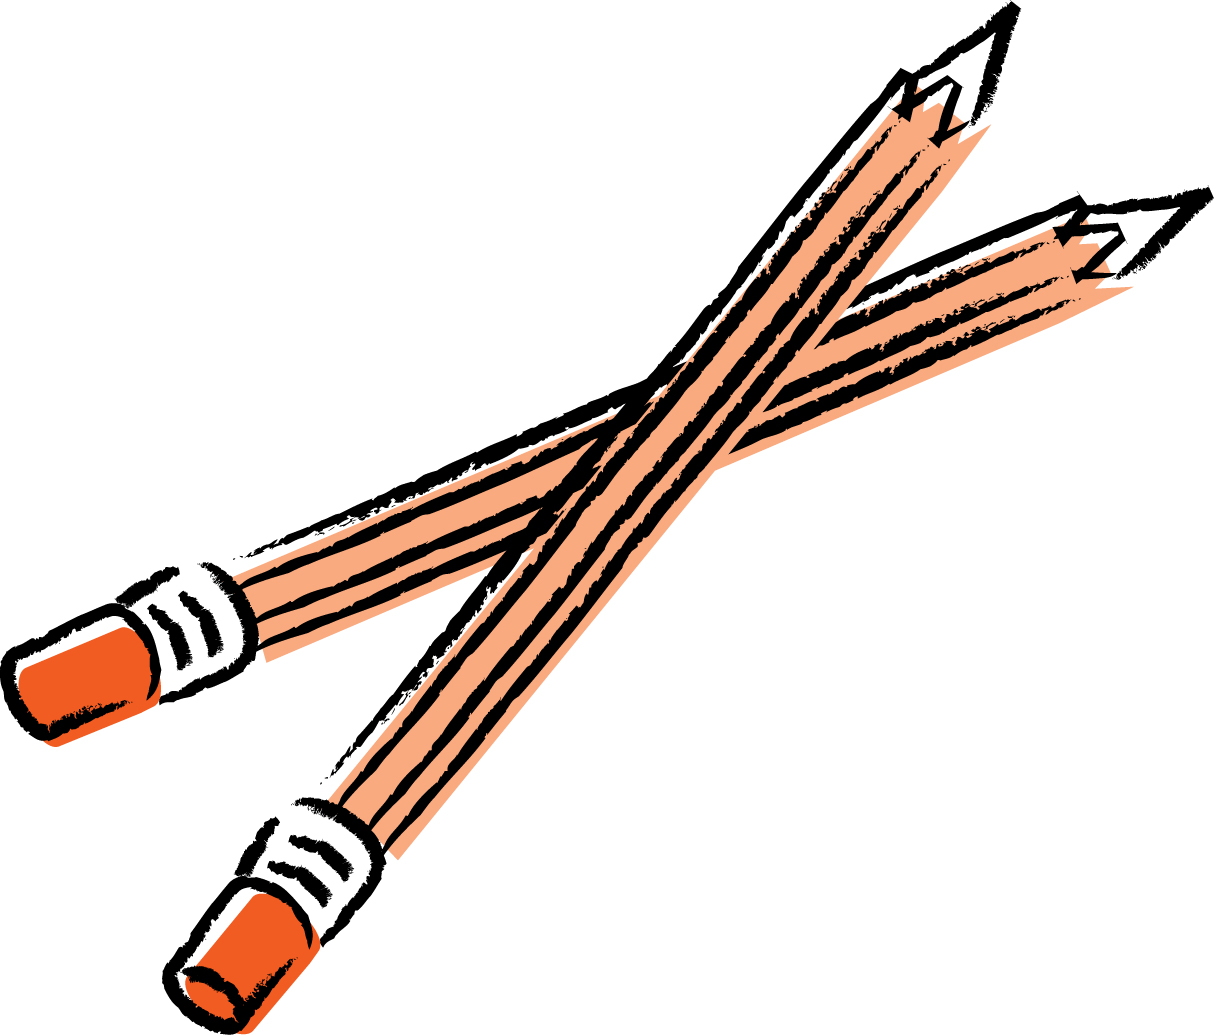 Free Pictures Of Pencil, Download Free Pictures Of Pencil png images